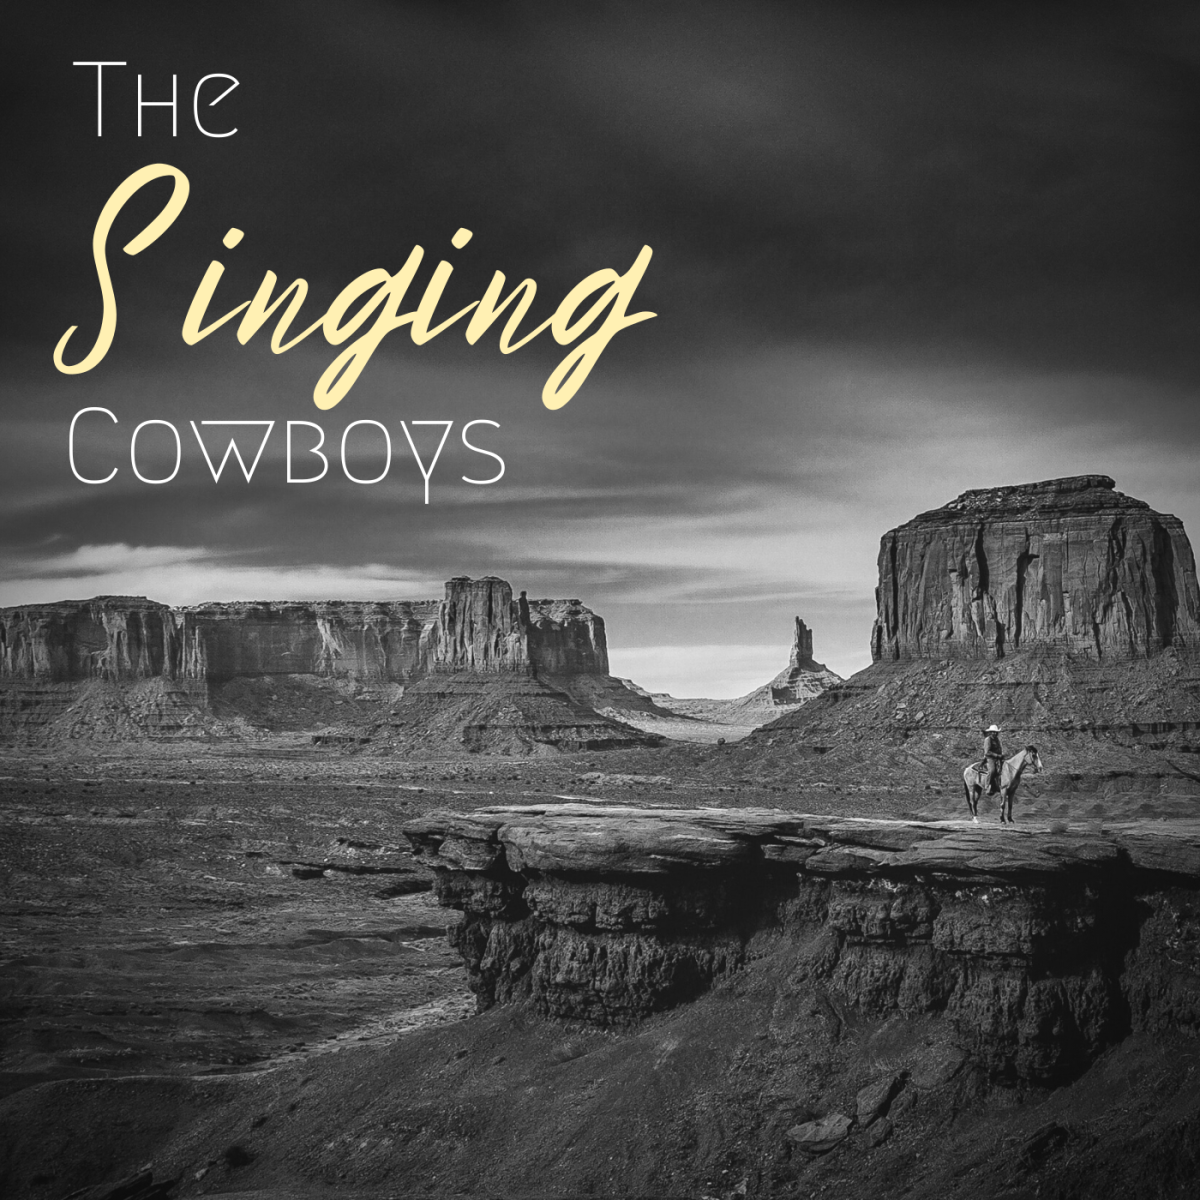 Learn about the singing cowboys and cowboy music.